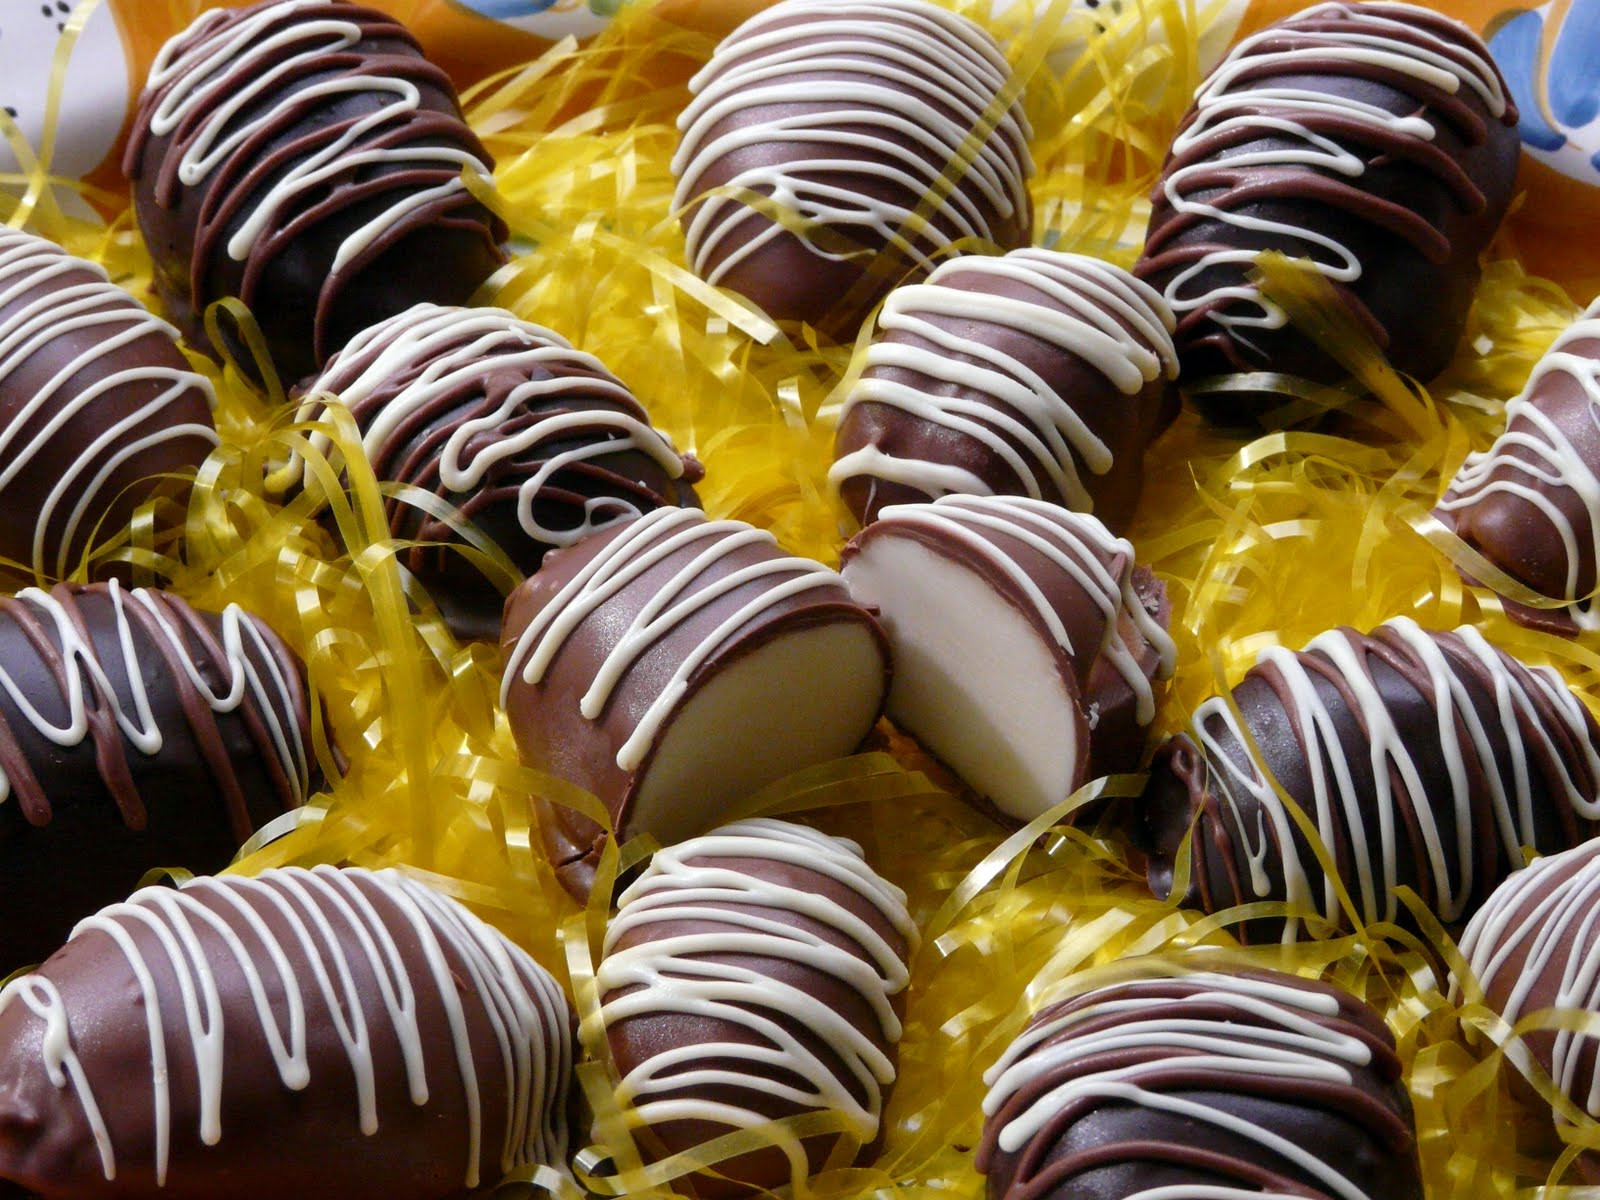 Candy Easter Eggs Recipe
 Thibeault s Table Homemade Chocolate Coated Cream Filled